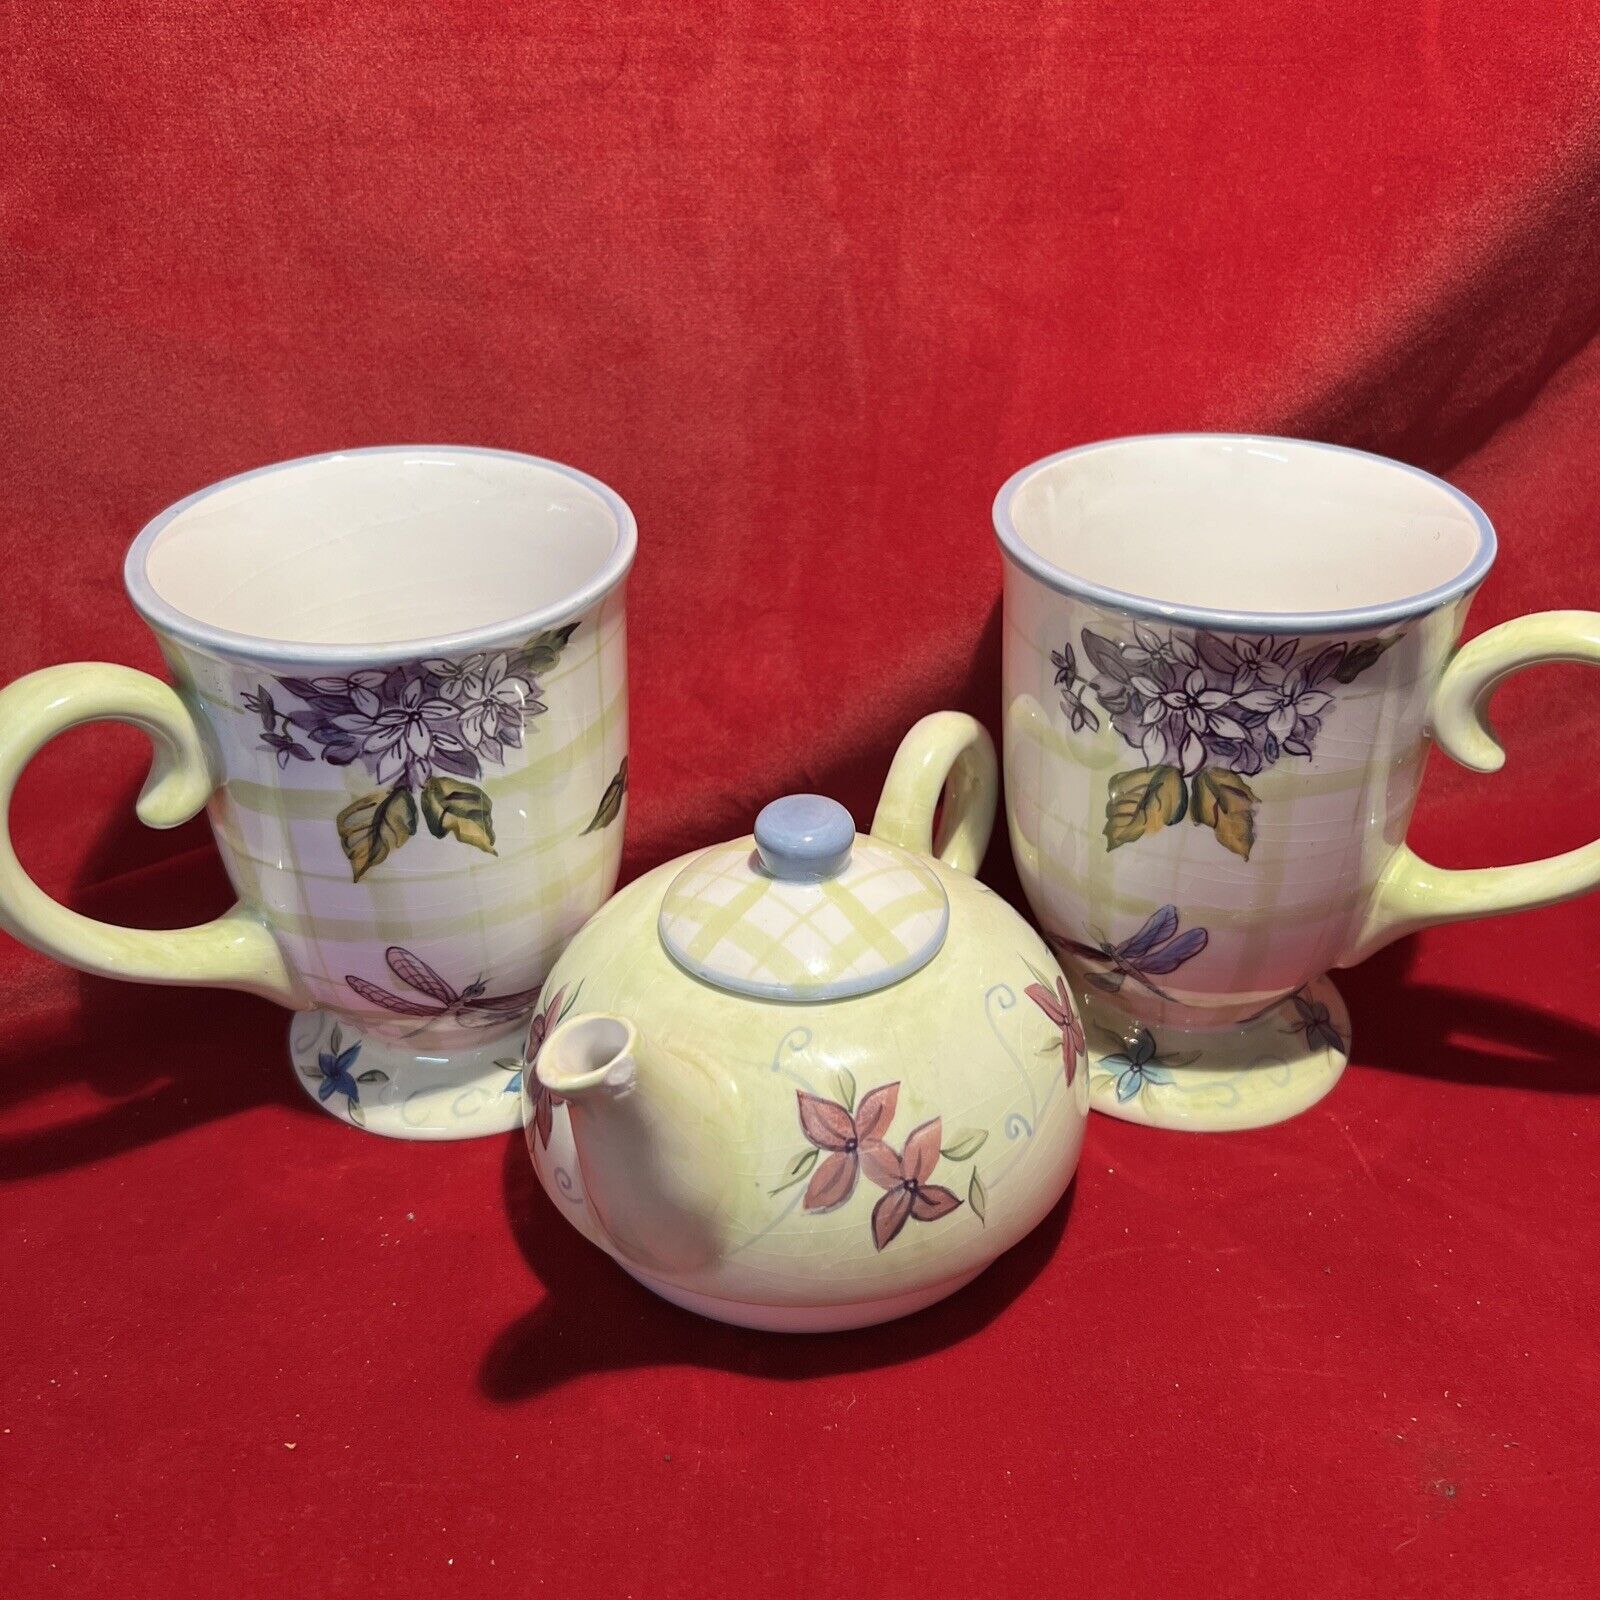 Vintage Zrike Company Individual Teapot with 2 Mugs and Lid -Floral Design (N73)